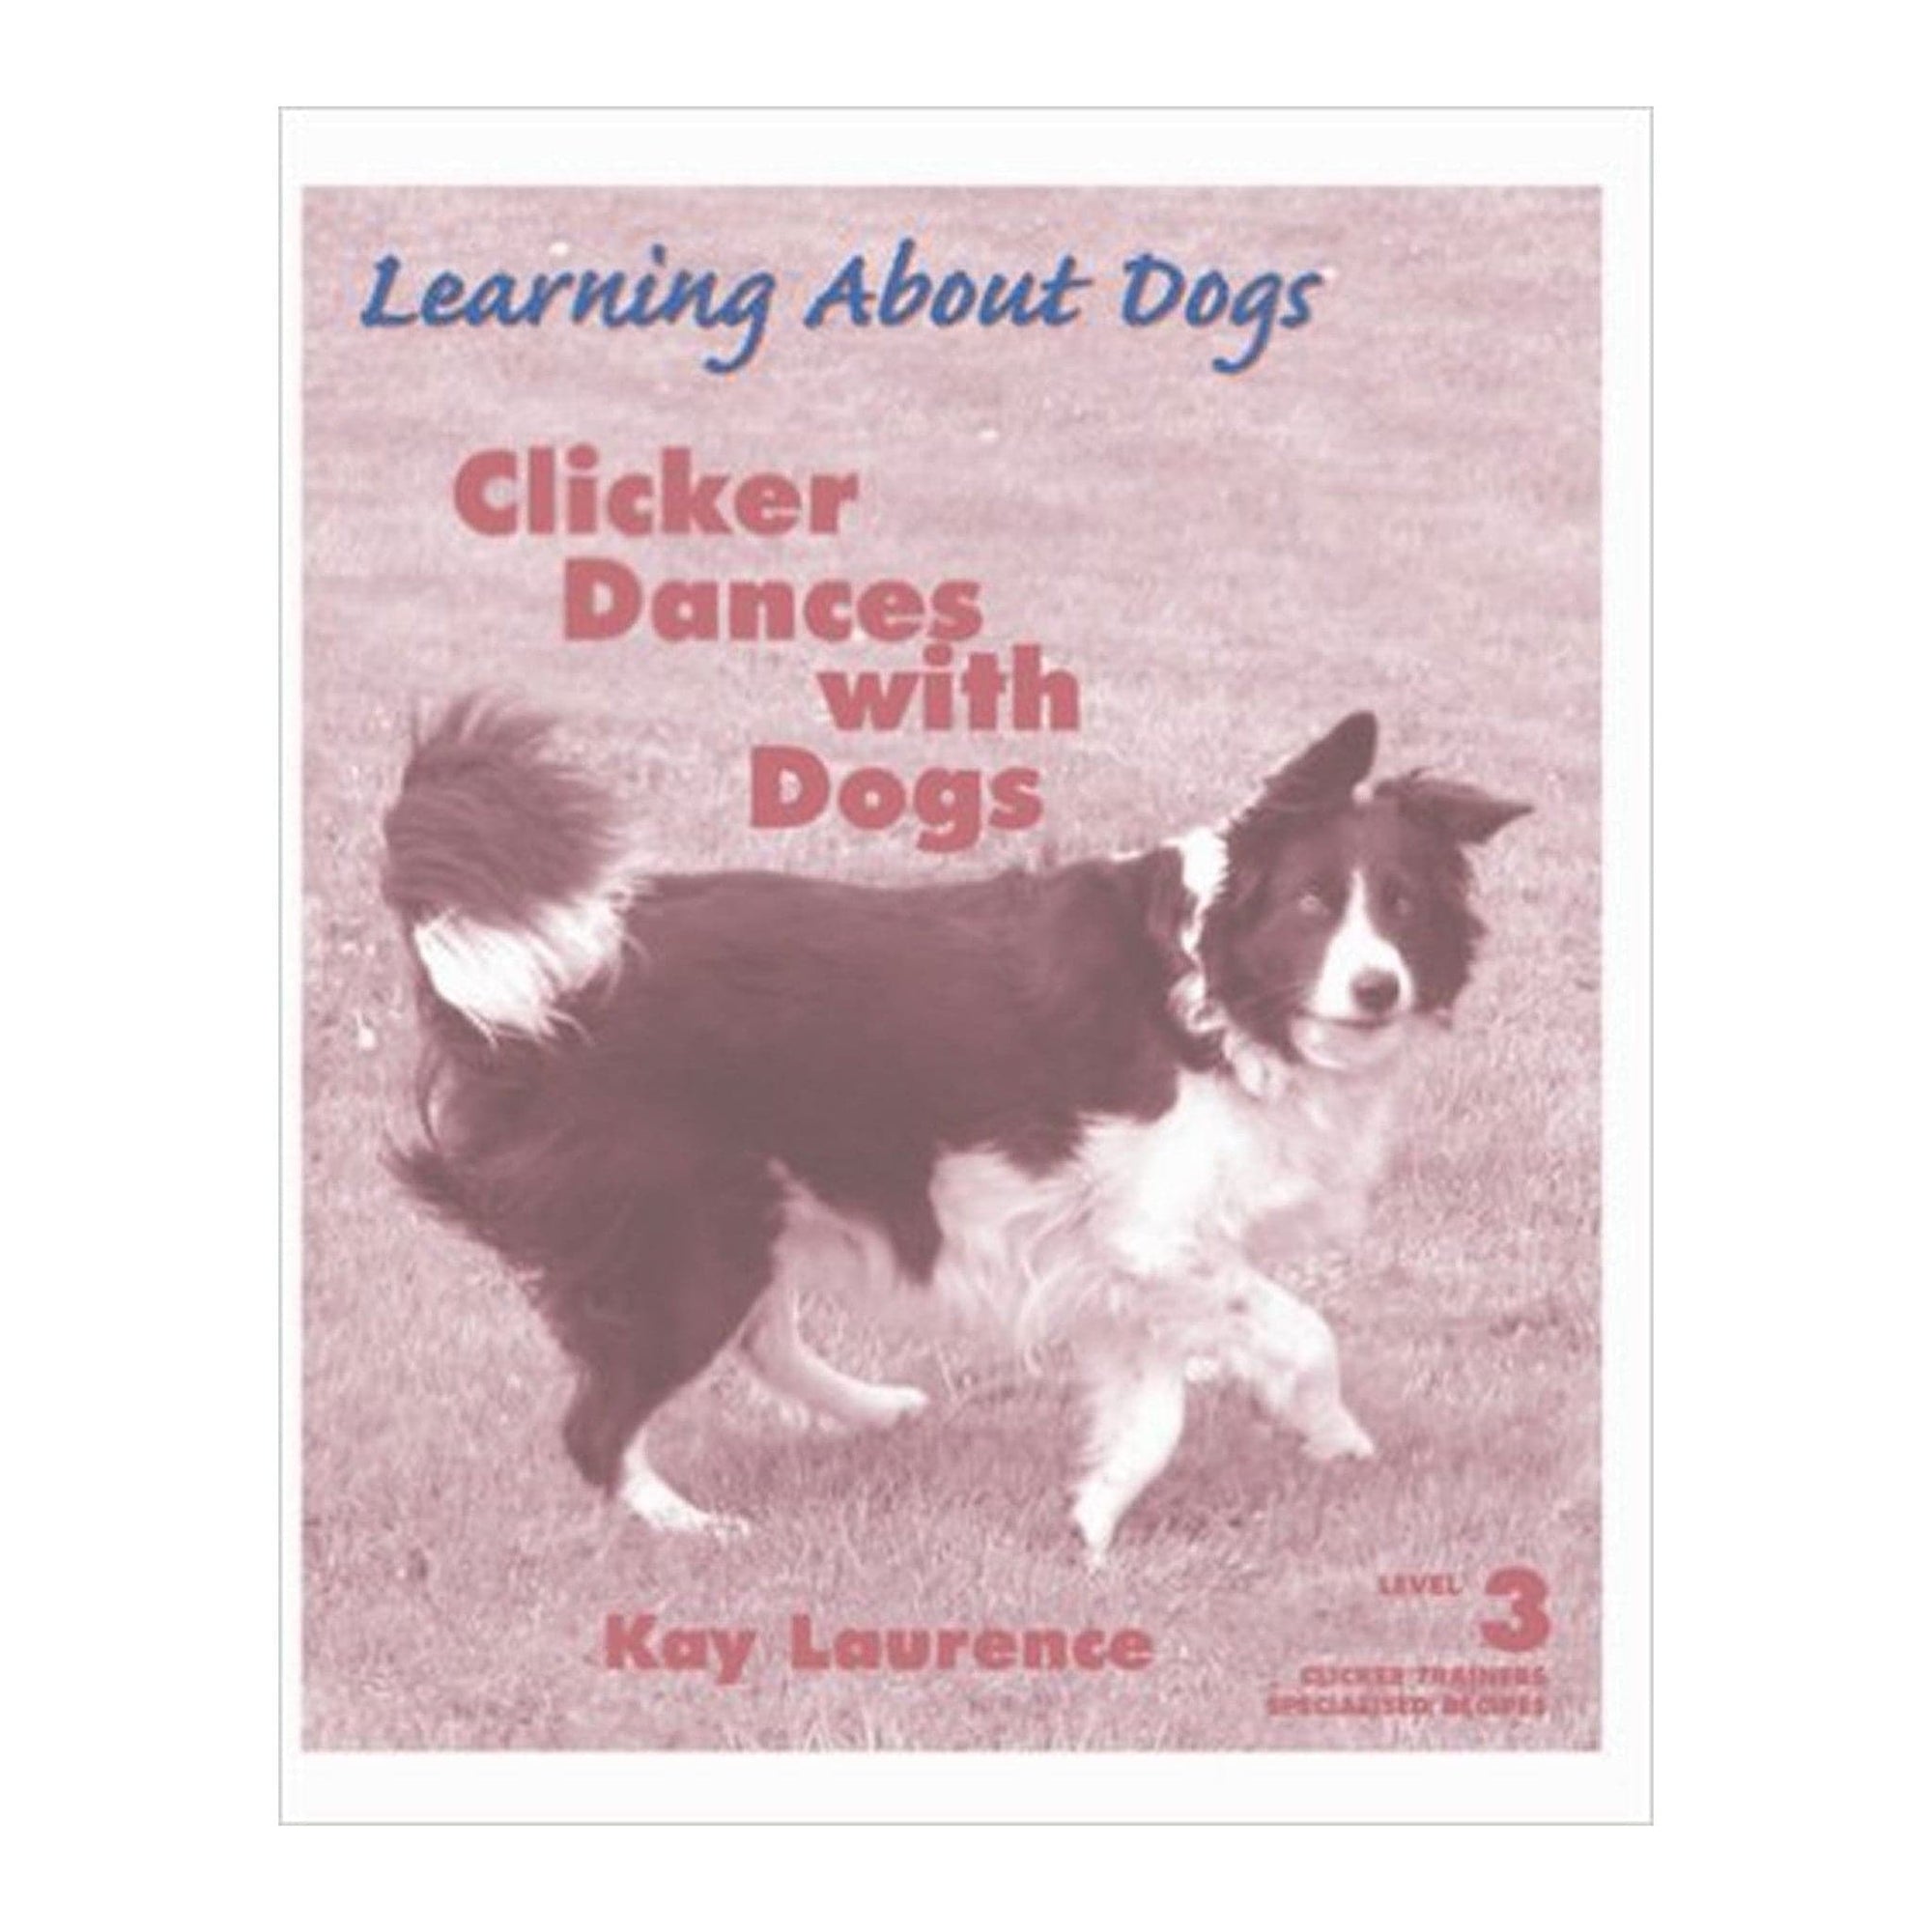 Clicker Dances with Dogs by Kay Laurence